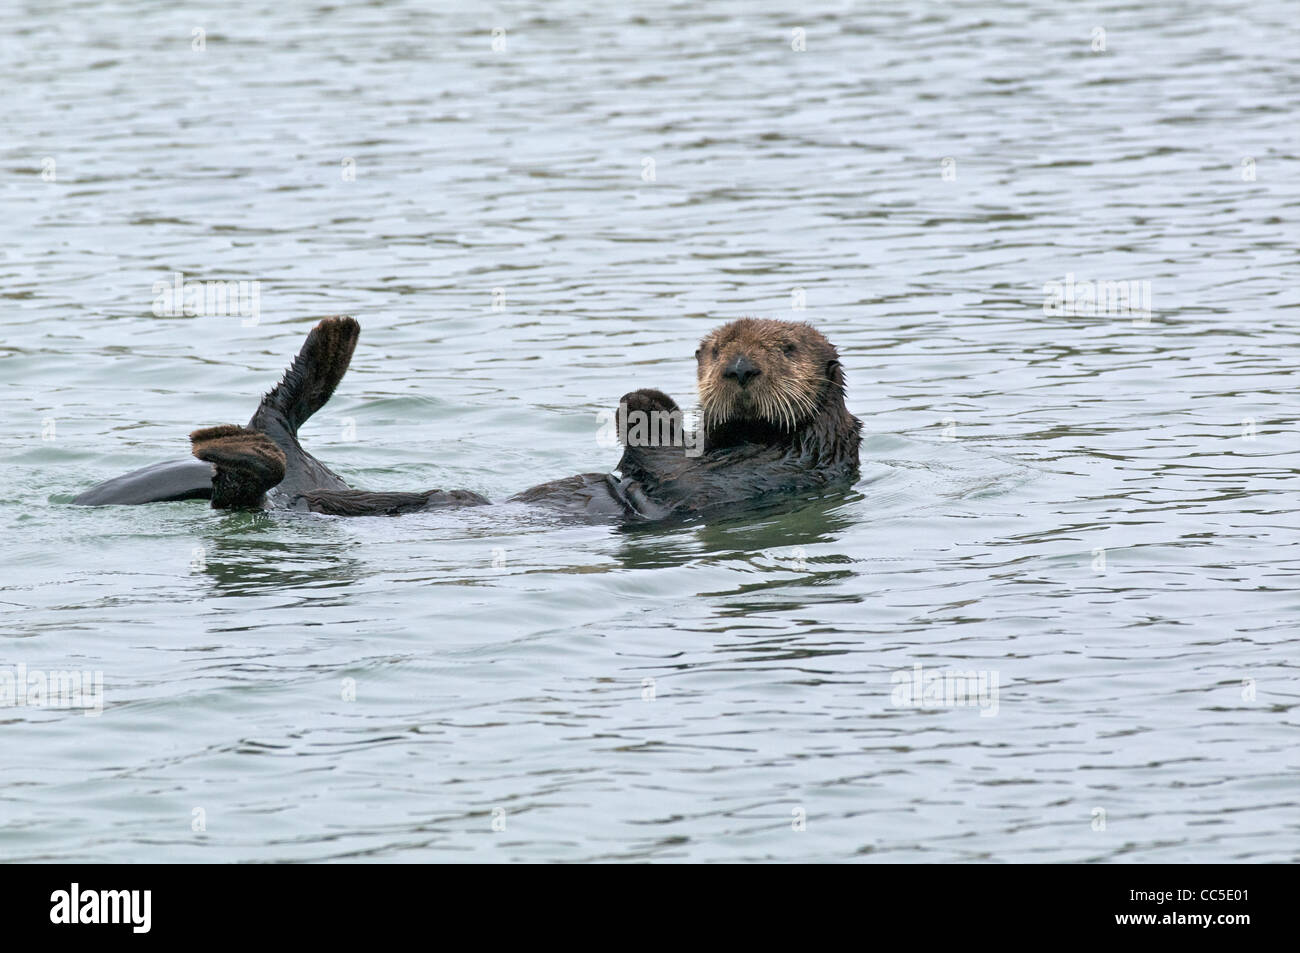 A California Sea Otter (Enhydra lutris nereis) floating on its back in Elkhorn Slough, Monterey County, California. Stock Photo